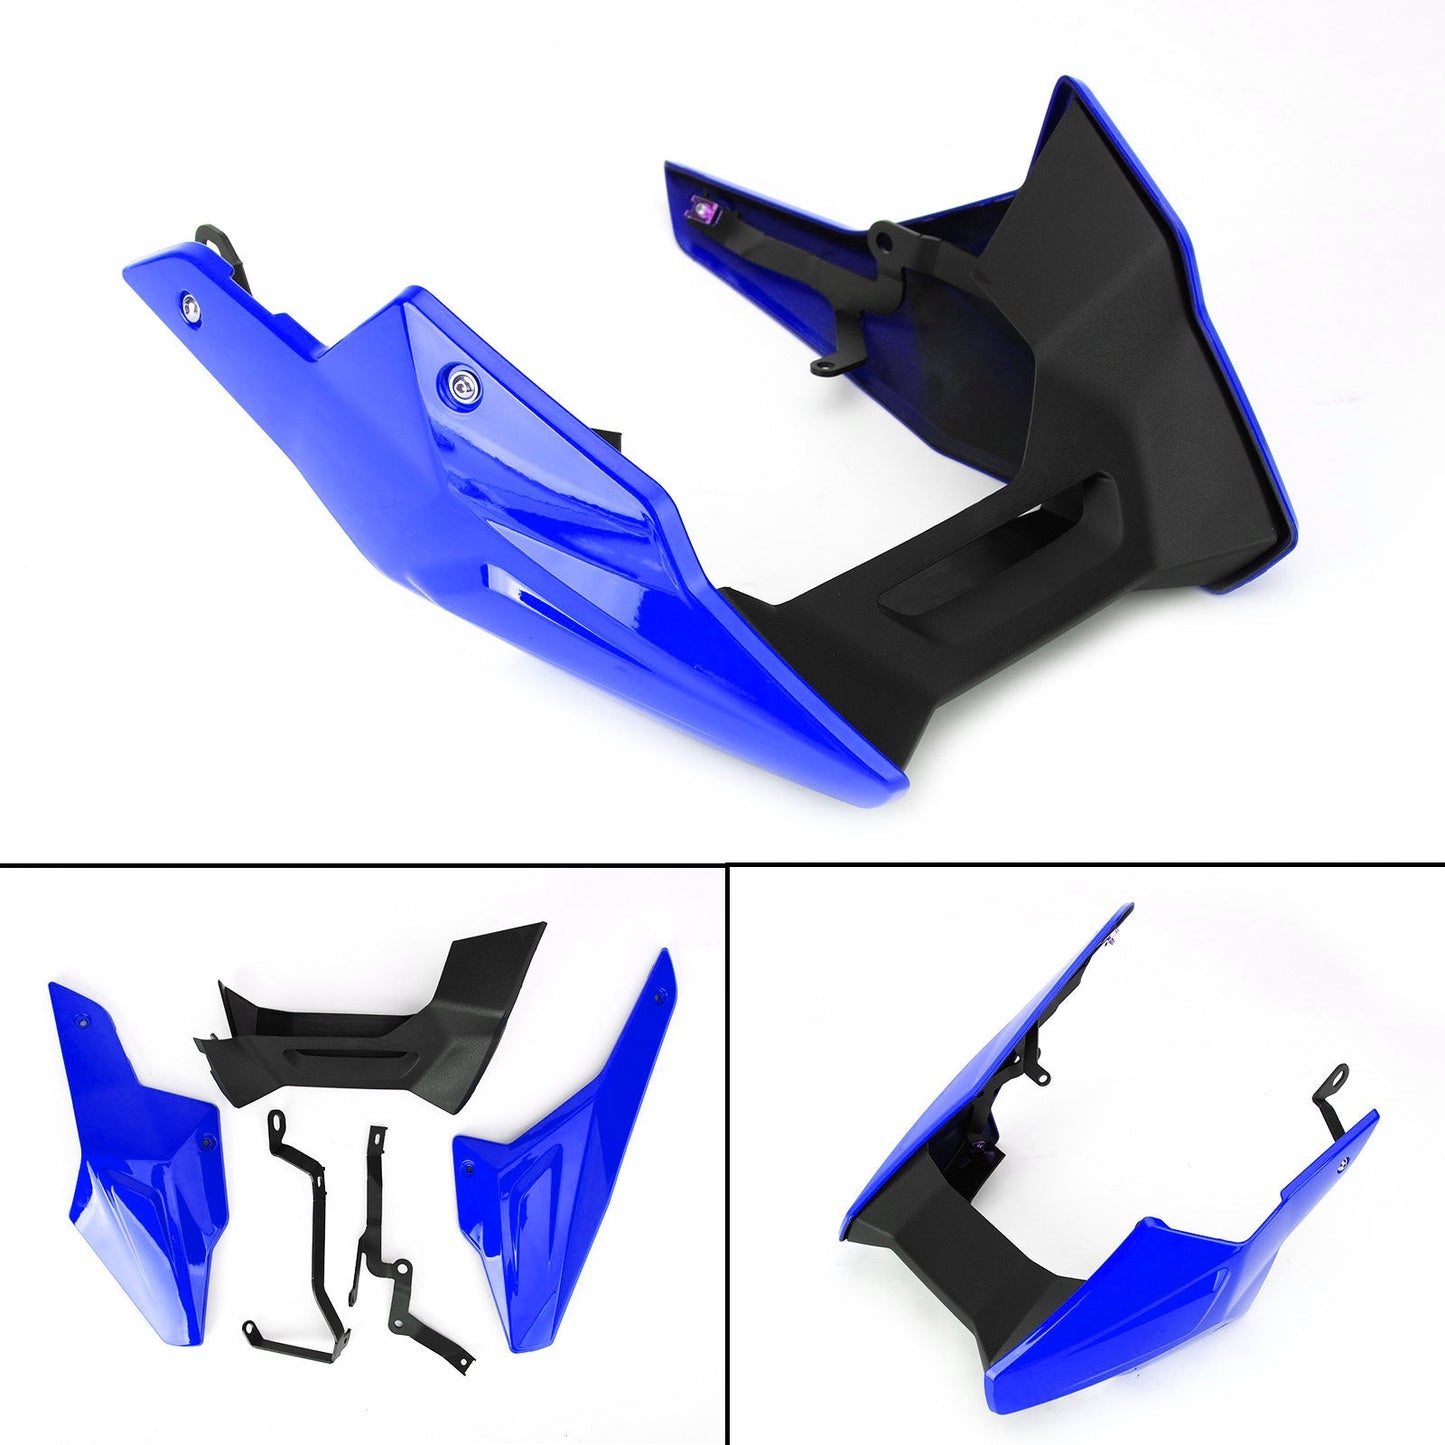 Engine Panel Belly Pan Lower Cowling Cover Fairing for BMW F900R/F900XR 2020-21 Blue